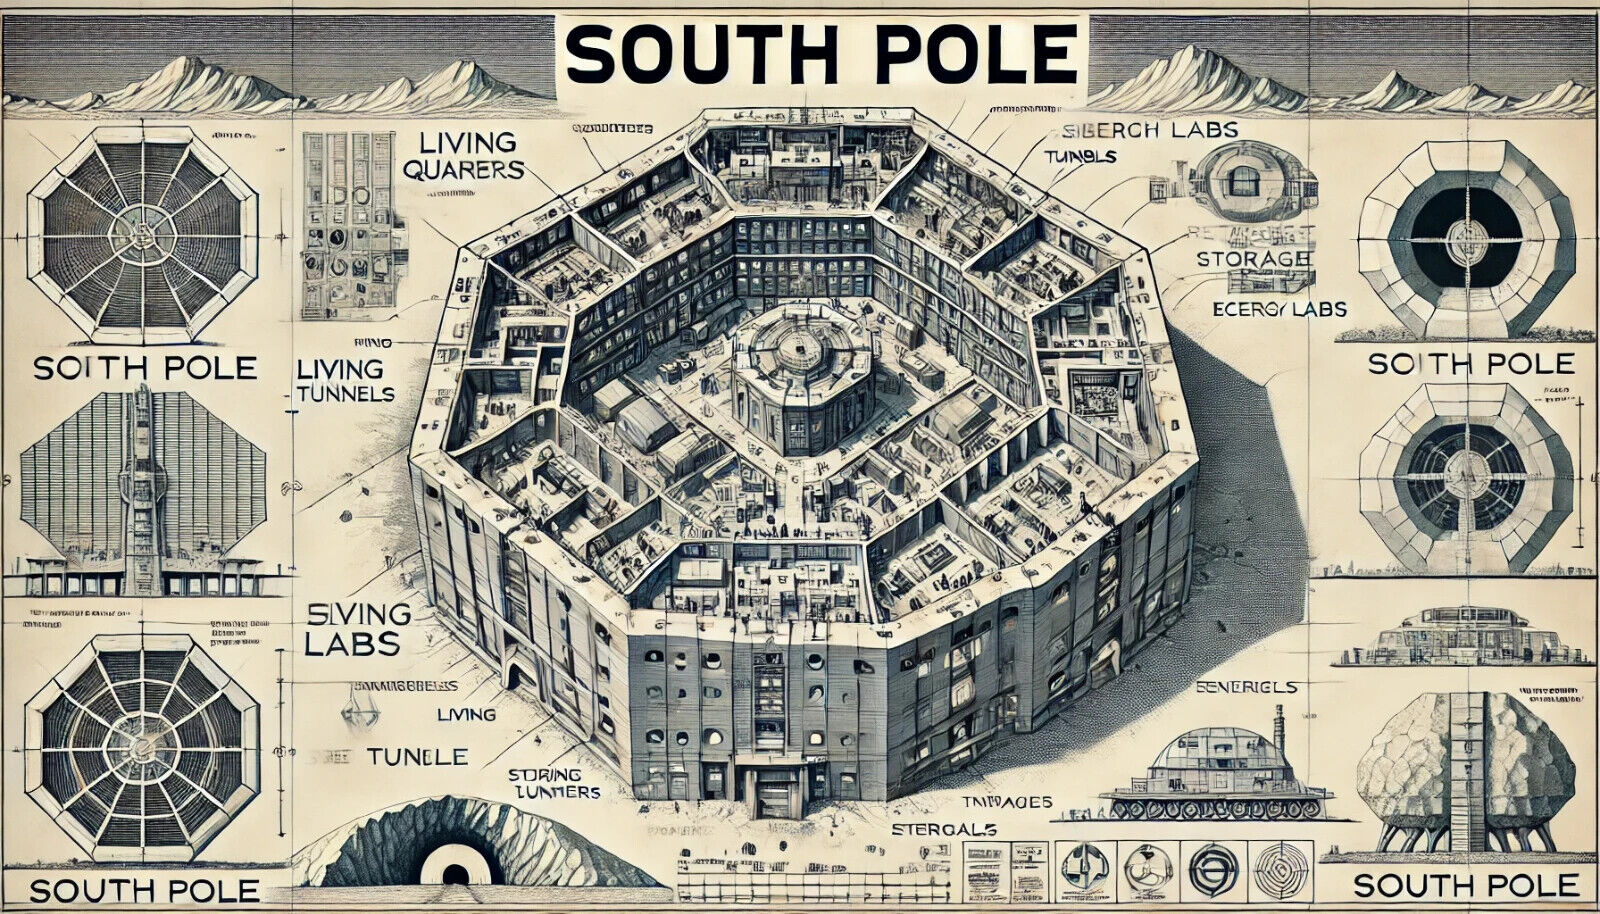 South Pole PYRAMID. Modern Giclee Print size:40 x 26 inches New